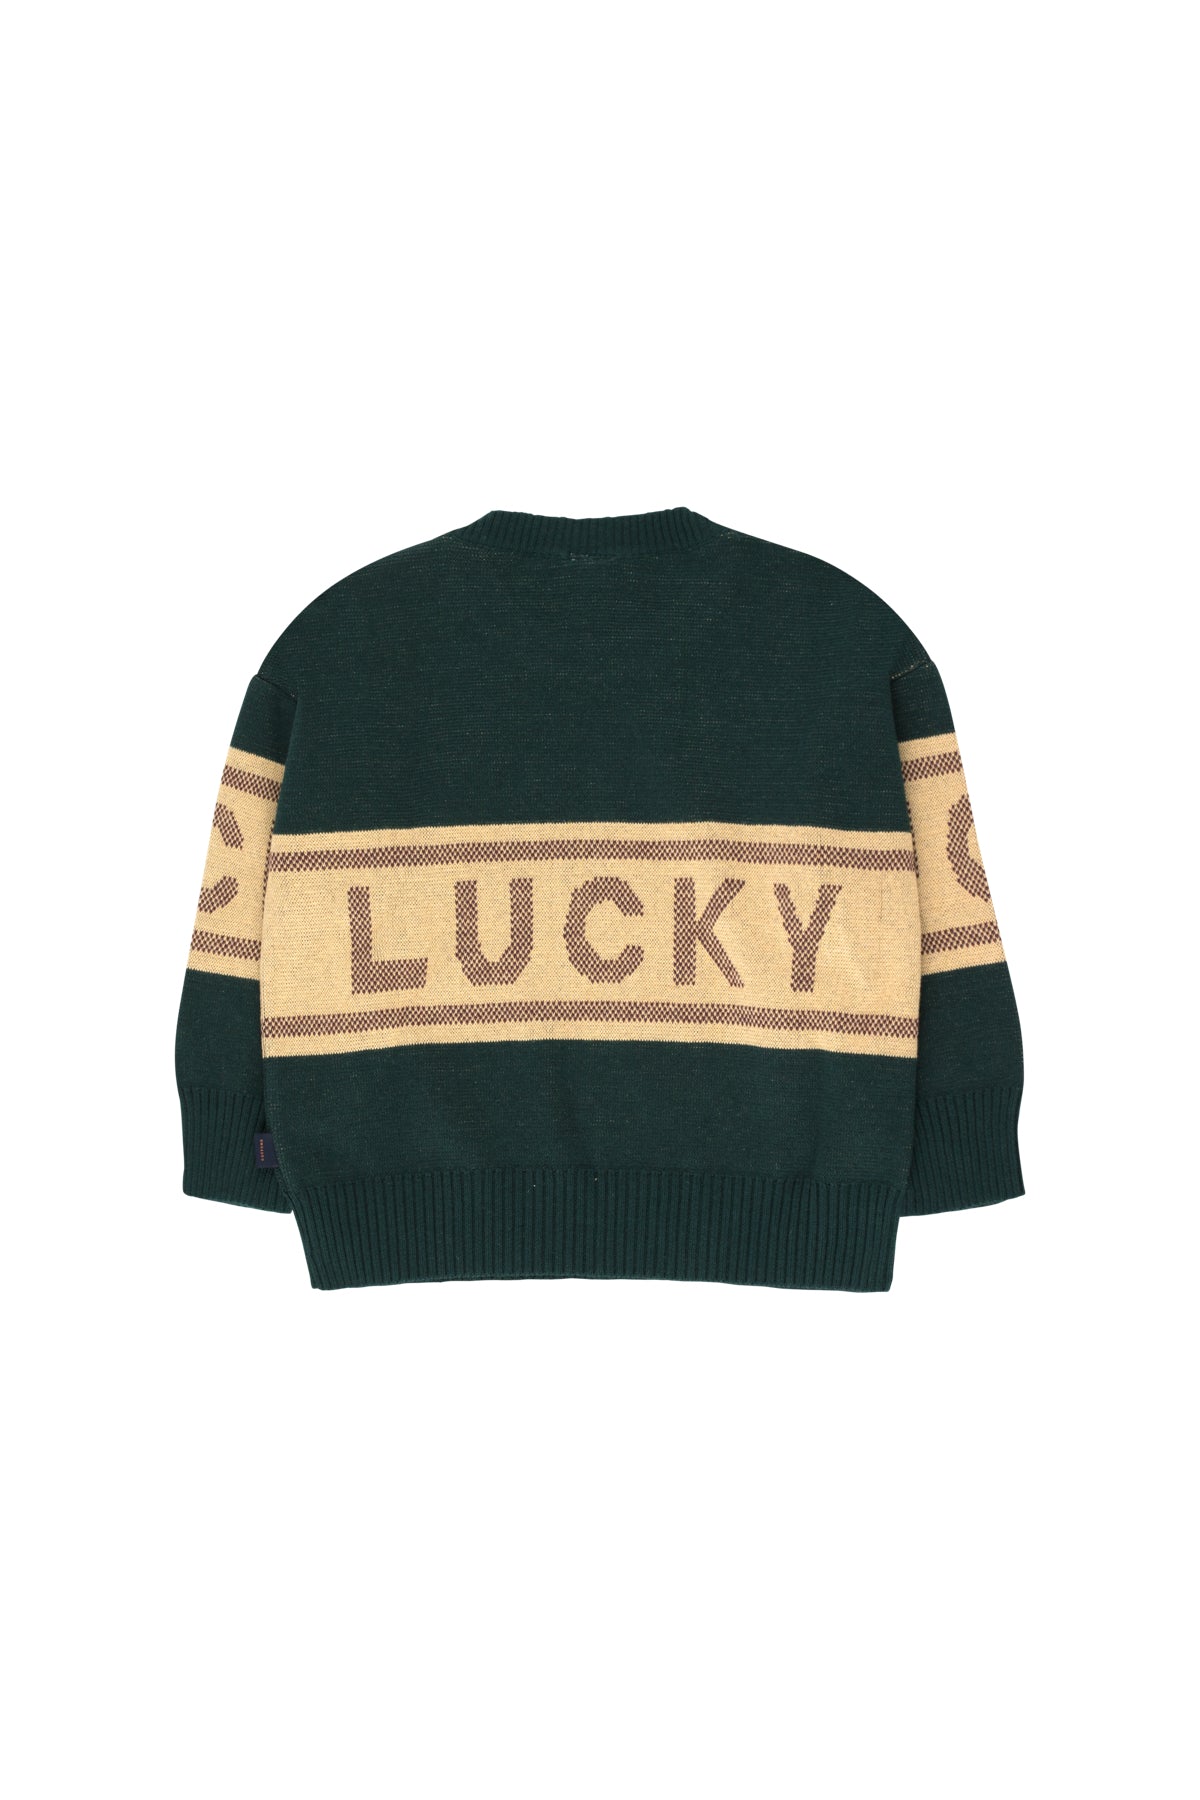 Tiny Cottons Lucky Sweater - Bottle Green/Sand